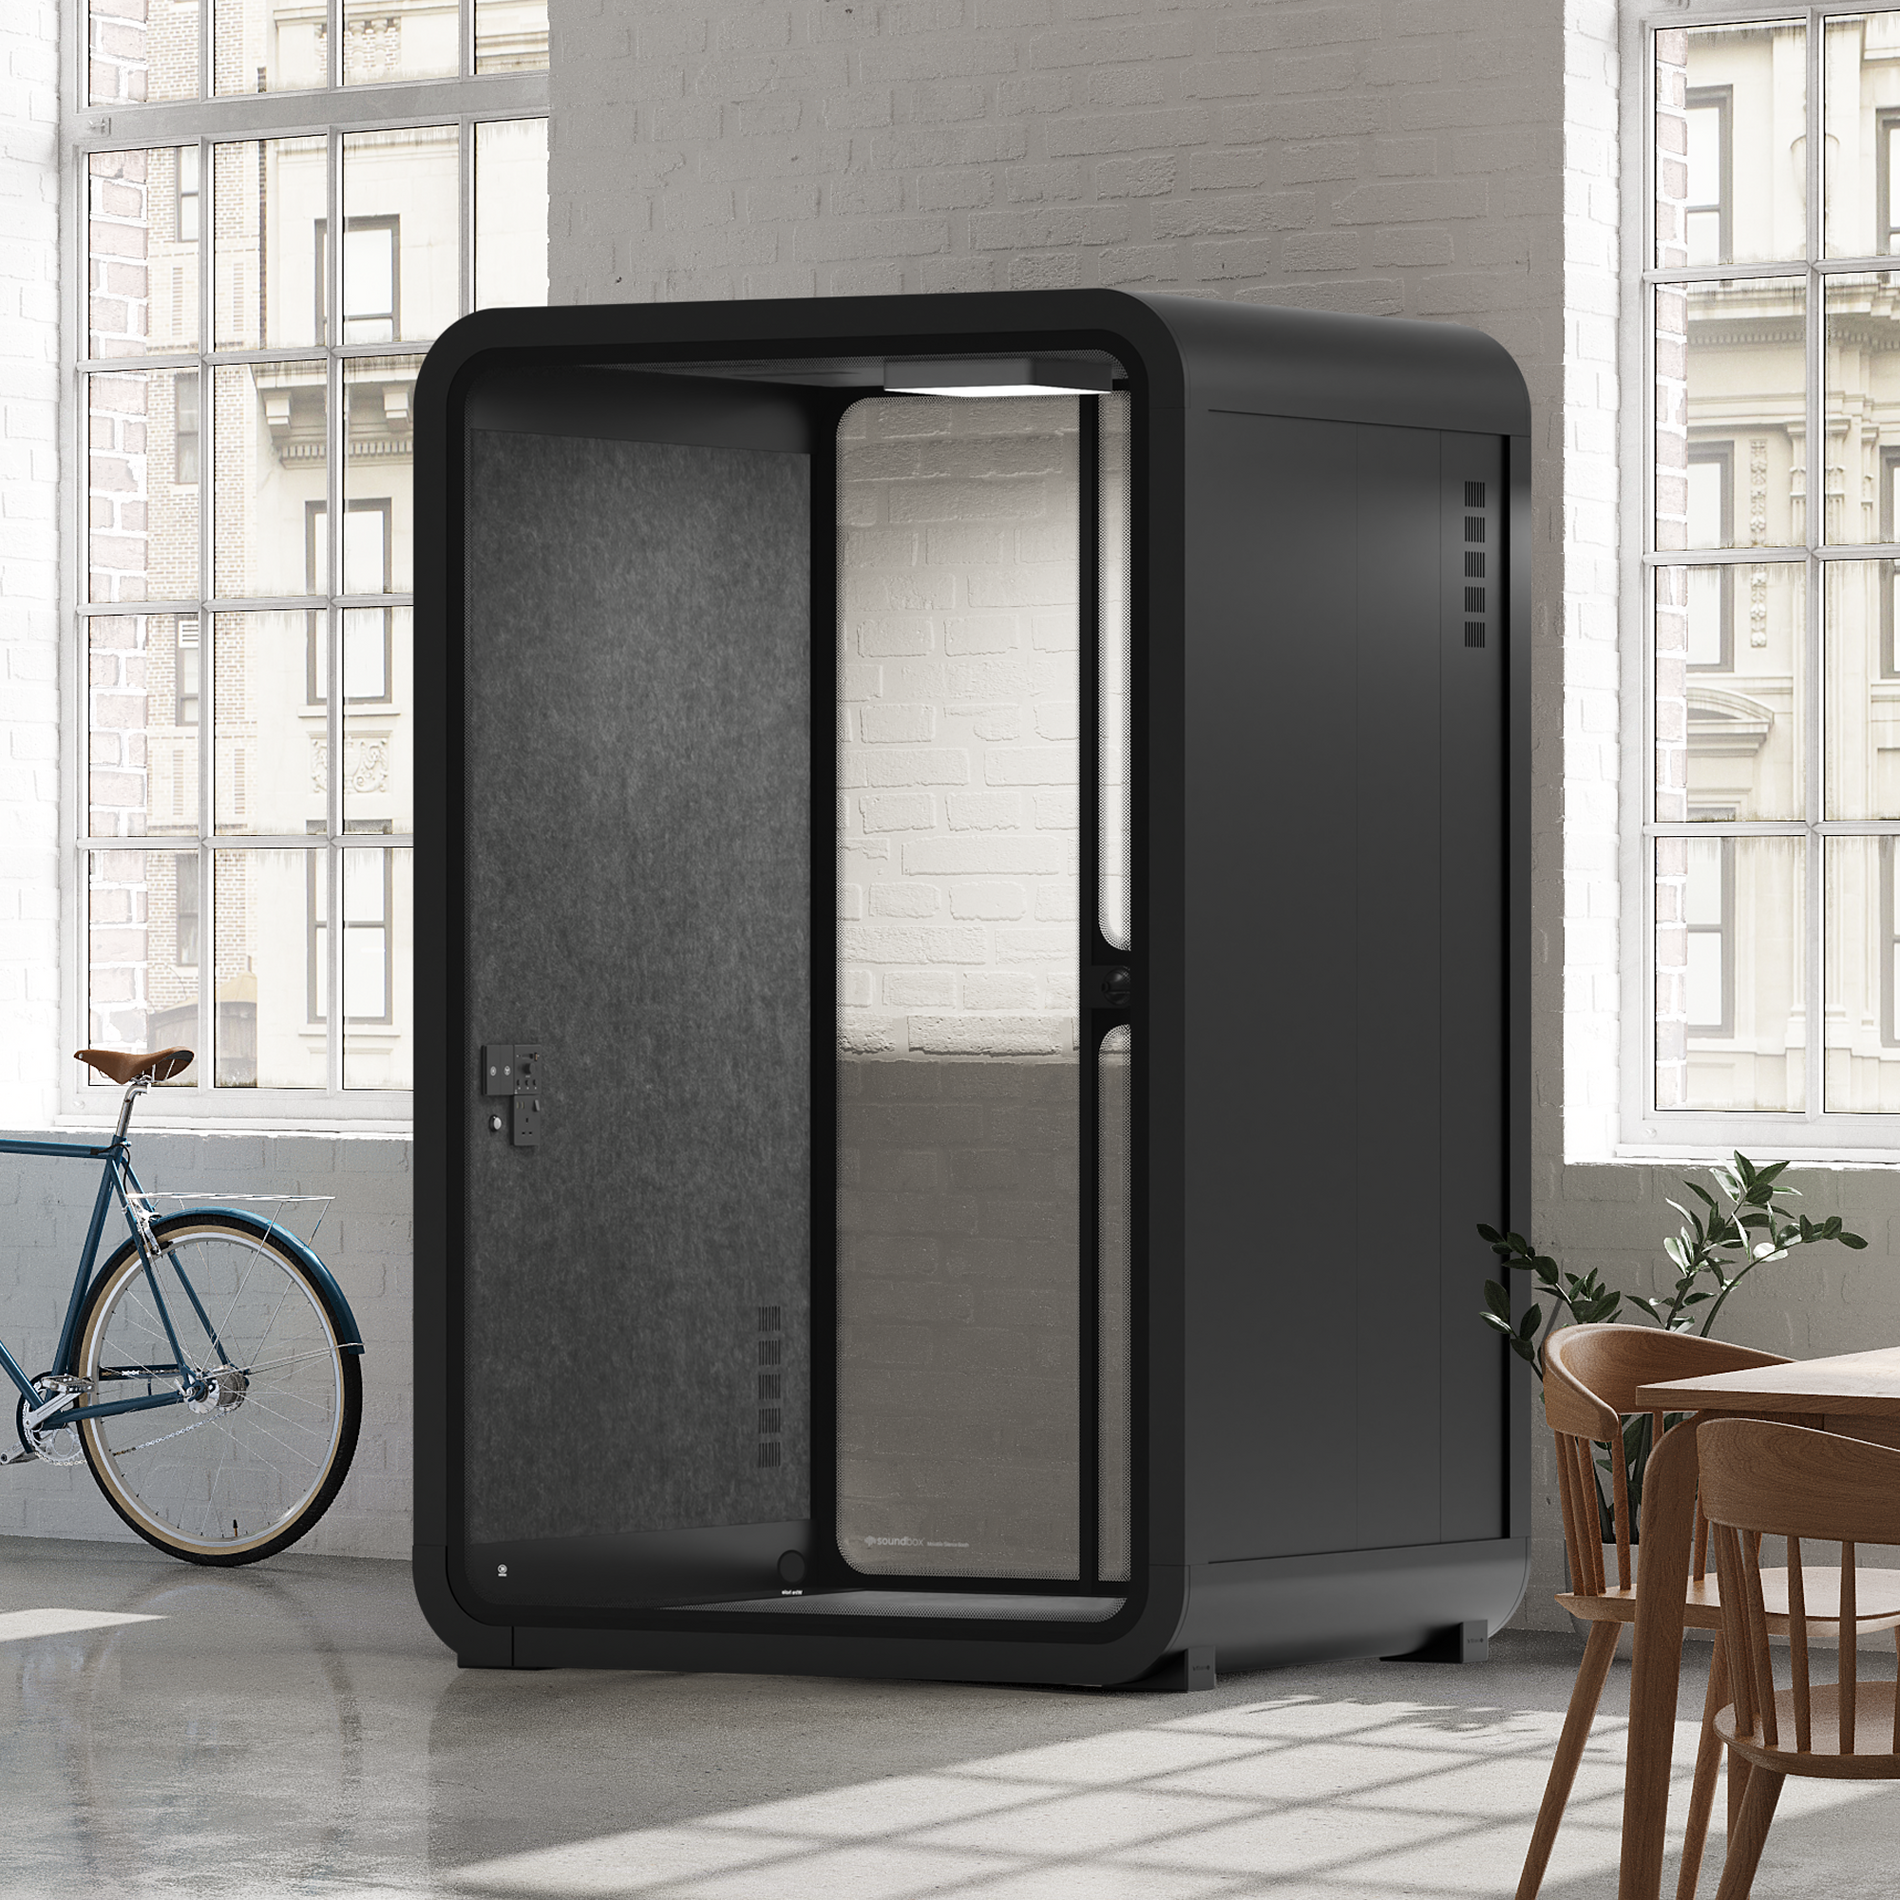 Quell - Office Pod - 2 PersonCharcoal / Dark Gray / No Furniture